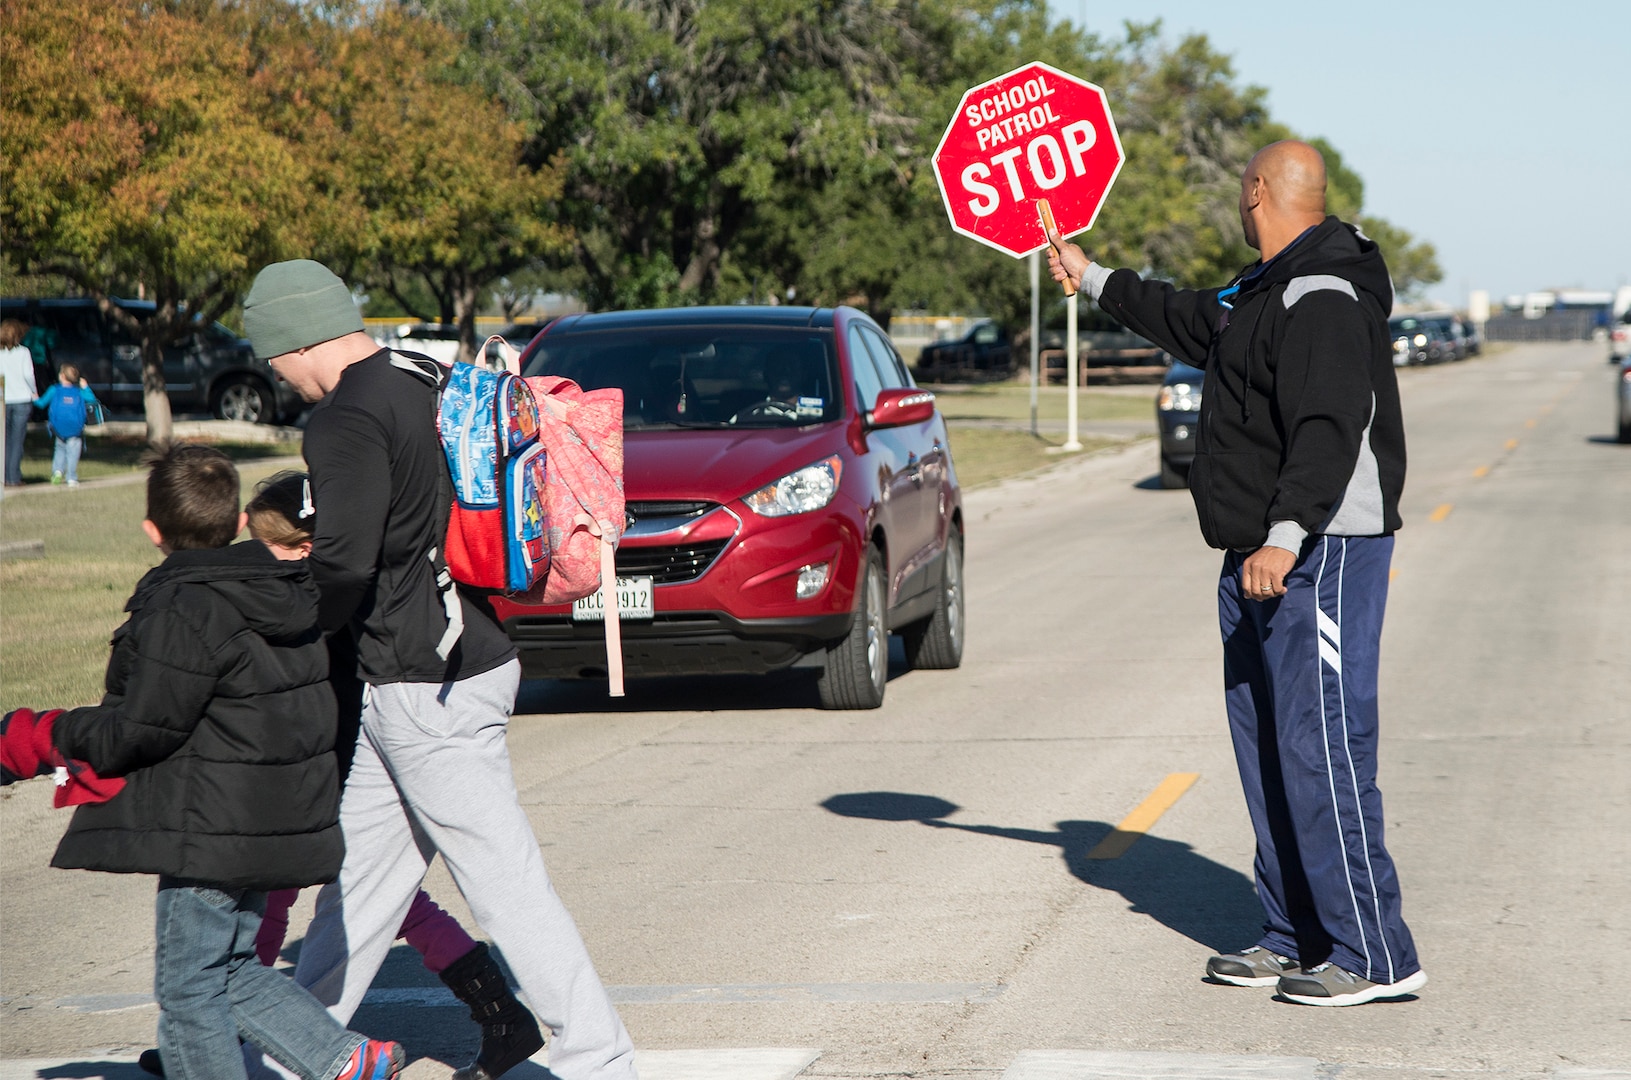 John Collins, Randolph Elementary School teacher’s aide, holds a stop sign to allow parents and their children to safely cross the street Nov. 17 at Joint Base San Antonio, Texas. The 902nd Security Forces Squadron is stepping up its patrols because of speeding problems that pose safety risks to children boarding school buses.  Be alert. Children are unpredictable. Children walking to or from school are usually very comfortable with their surroundings. This makes them more likely to take risks, ignore hazards or fail to look both ways when crossing the street. Drivers are urged to always watch for children crossing traffic lanes, observe school zone speed limits, instructions of crossing guards and use caution when traveling through school zones or near routes used by children. 